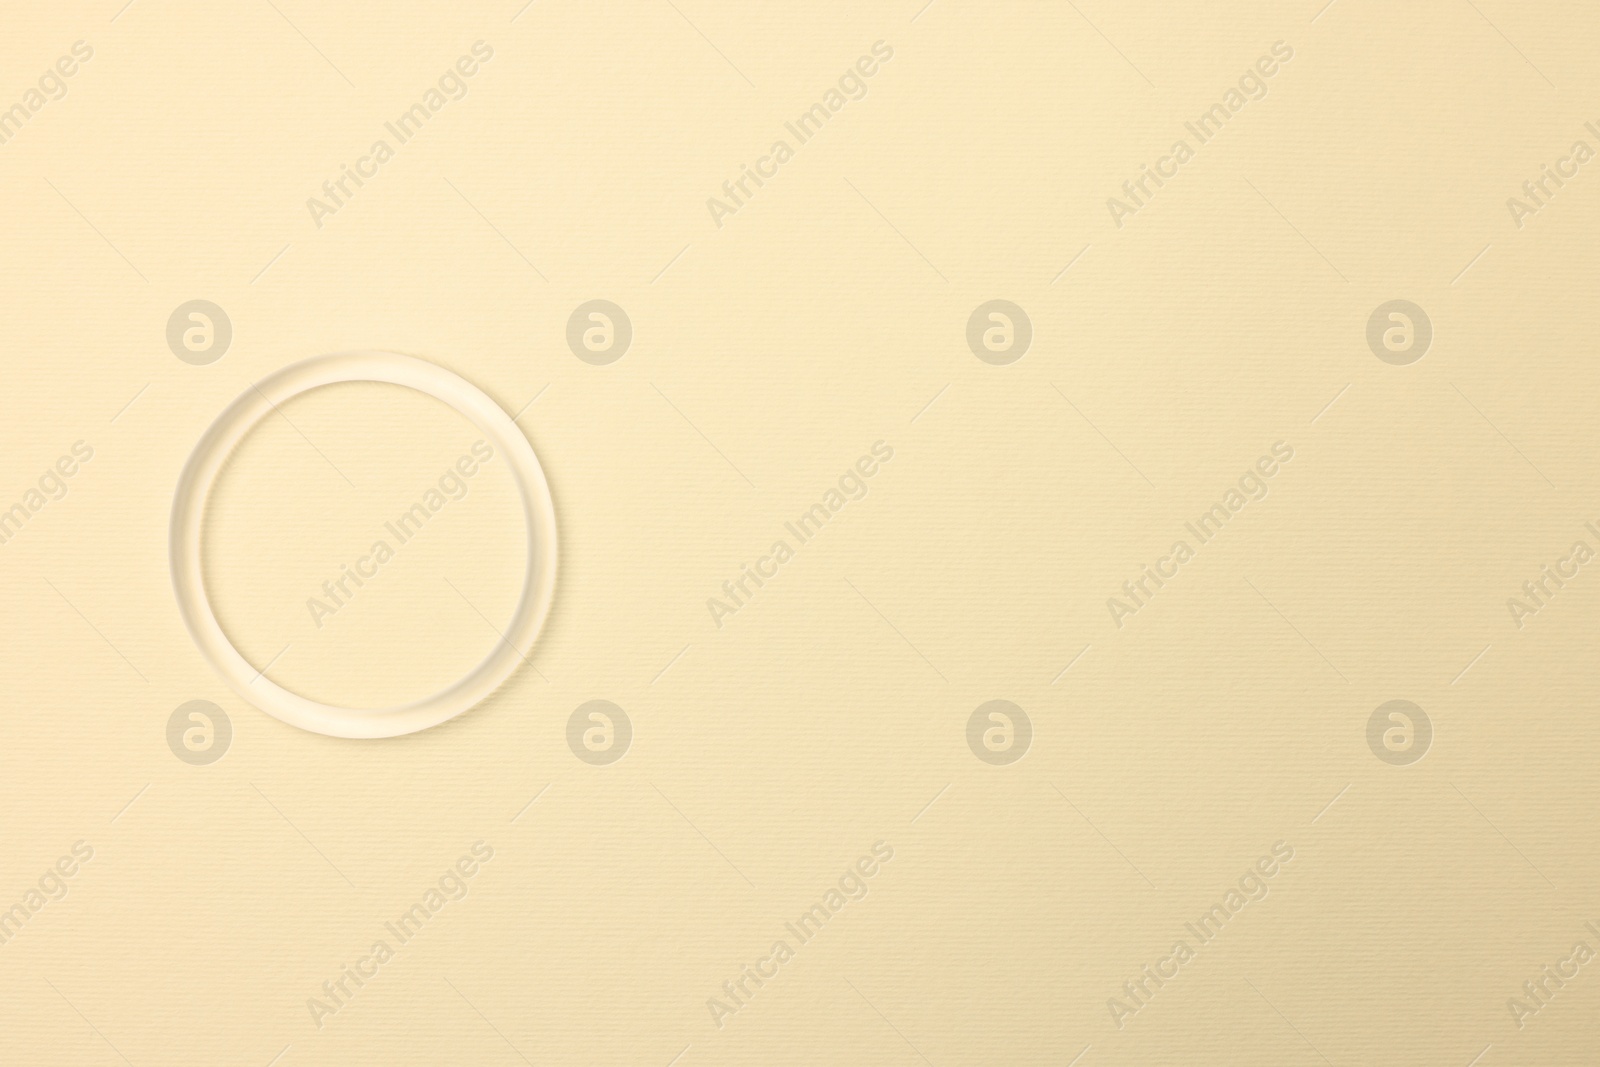 Photo of Diaphragm vaginal contraceptive ring on light yellow background, top view. Space for text